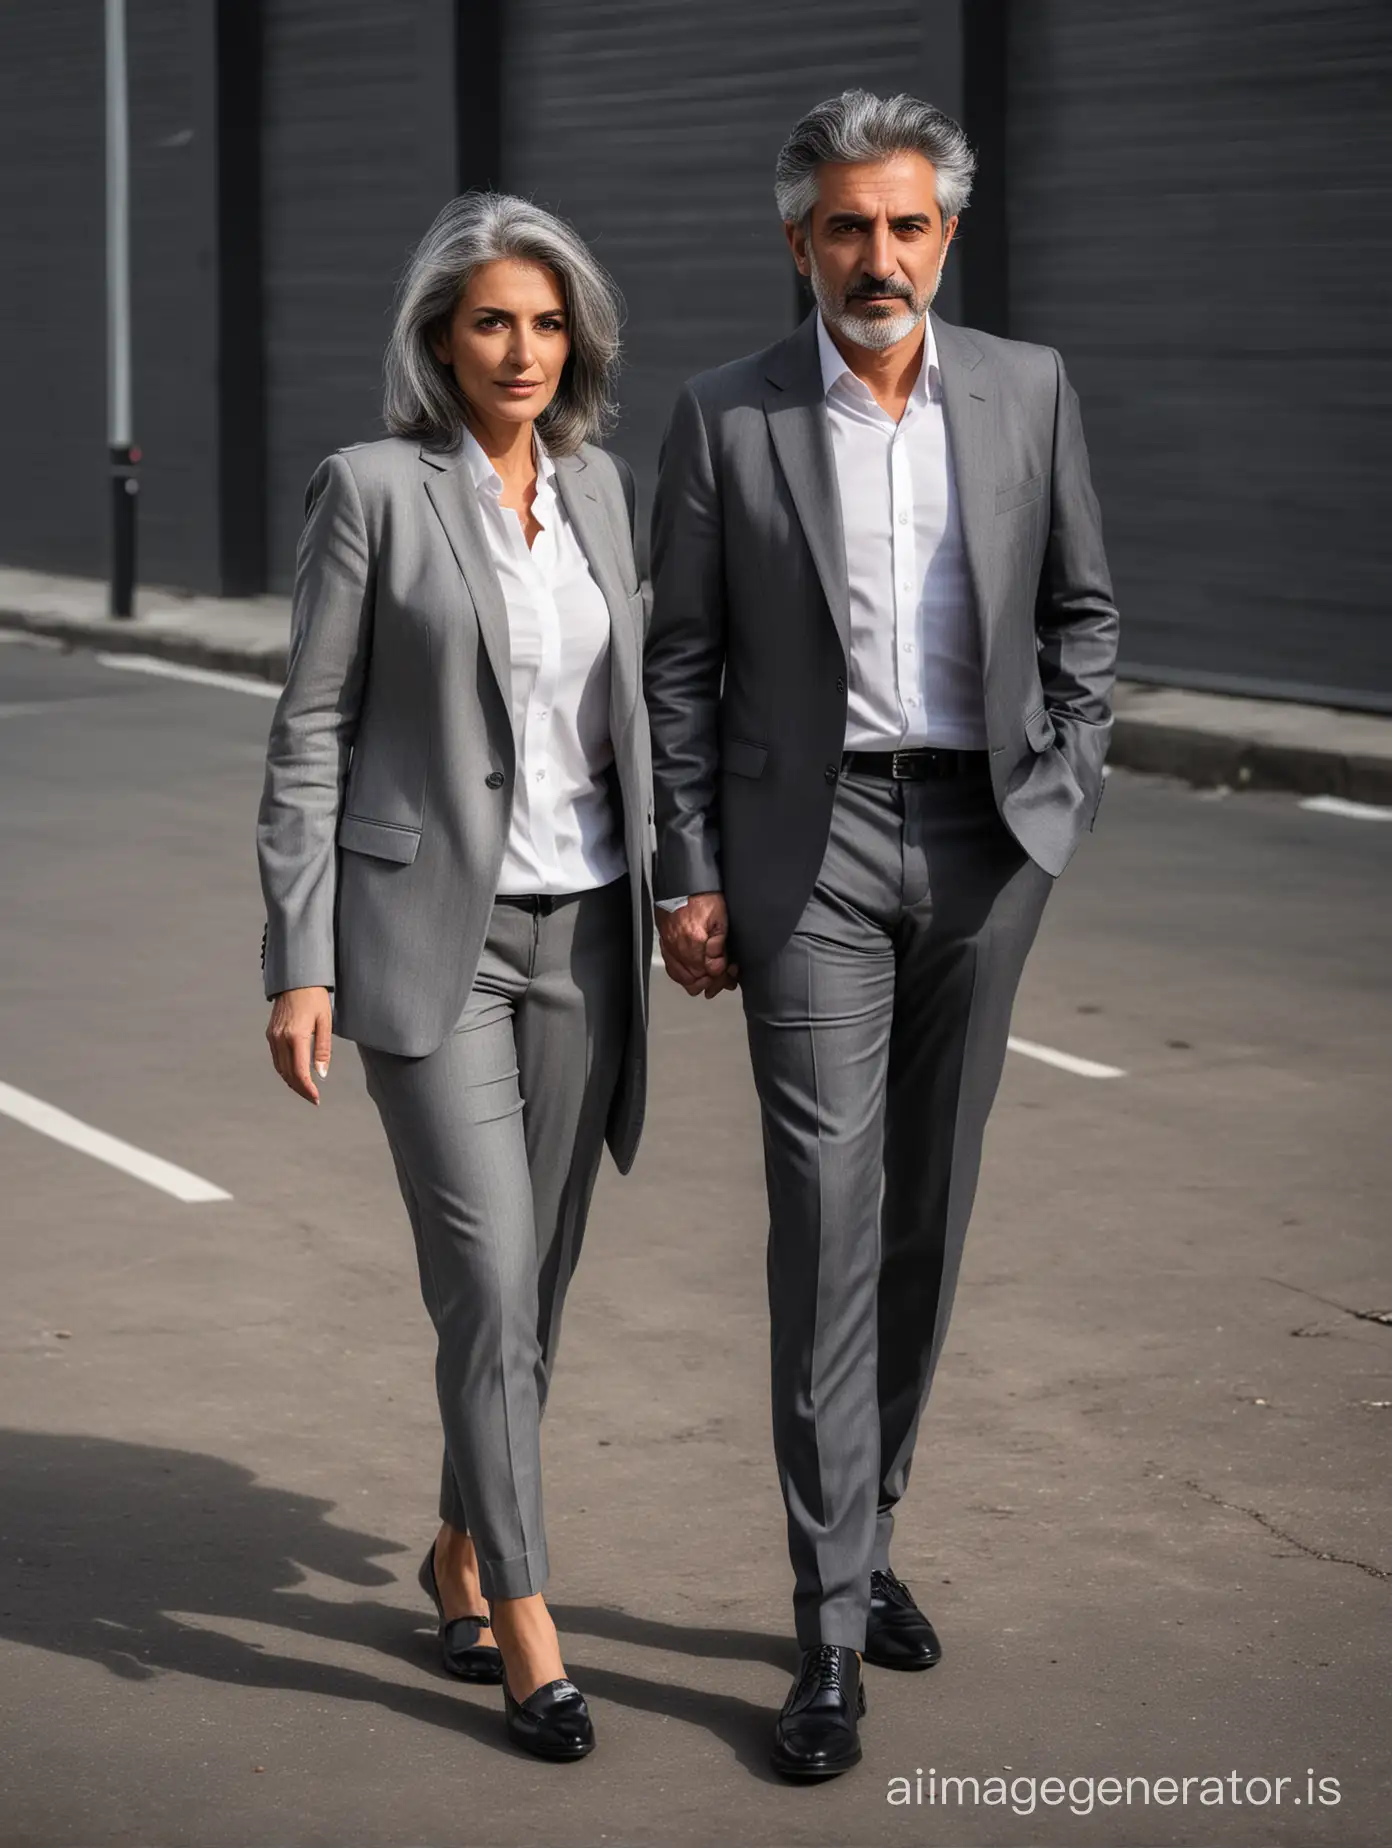 Middleaged-Iranian-Couple-in-Elegant-Grey-Suits-Pose-Dramatically-in-Parking-Lot